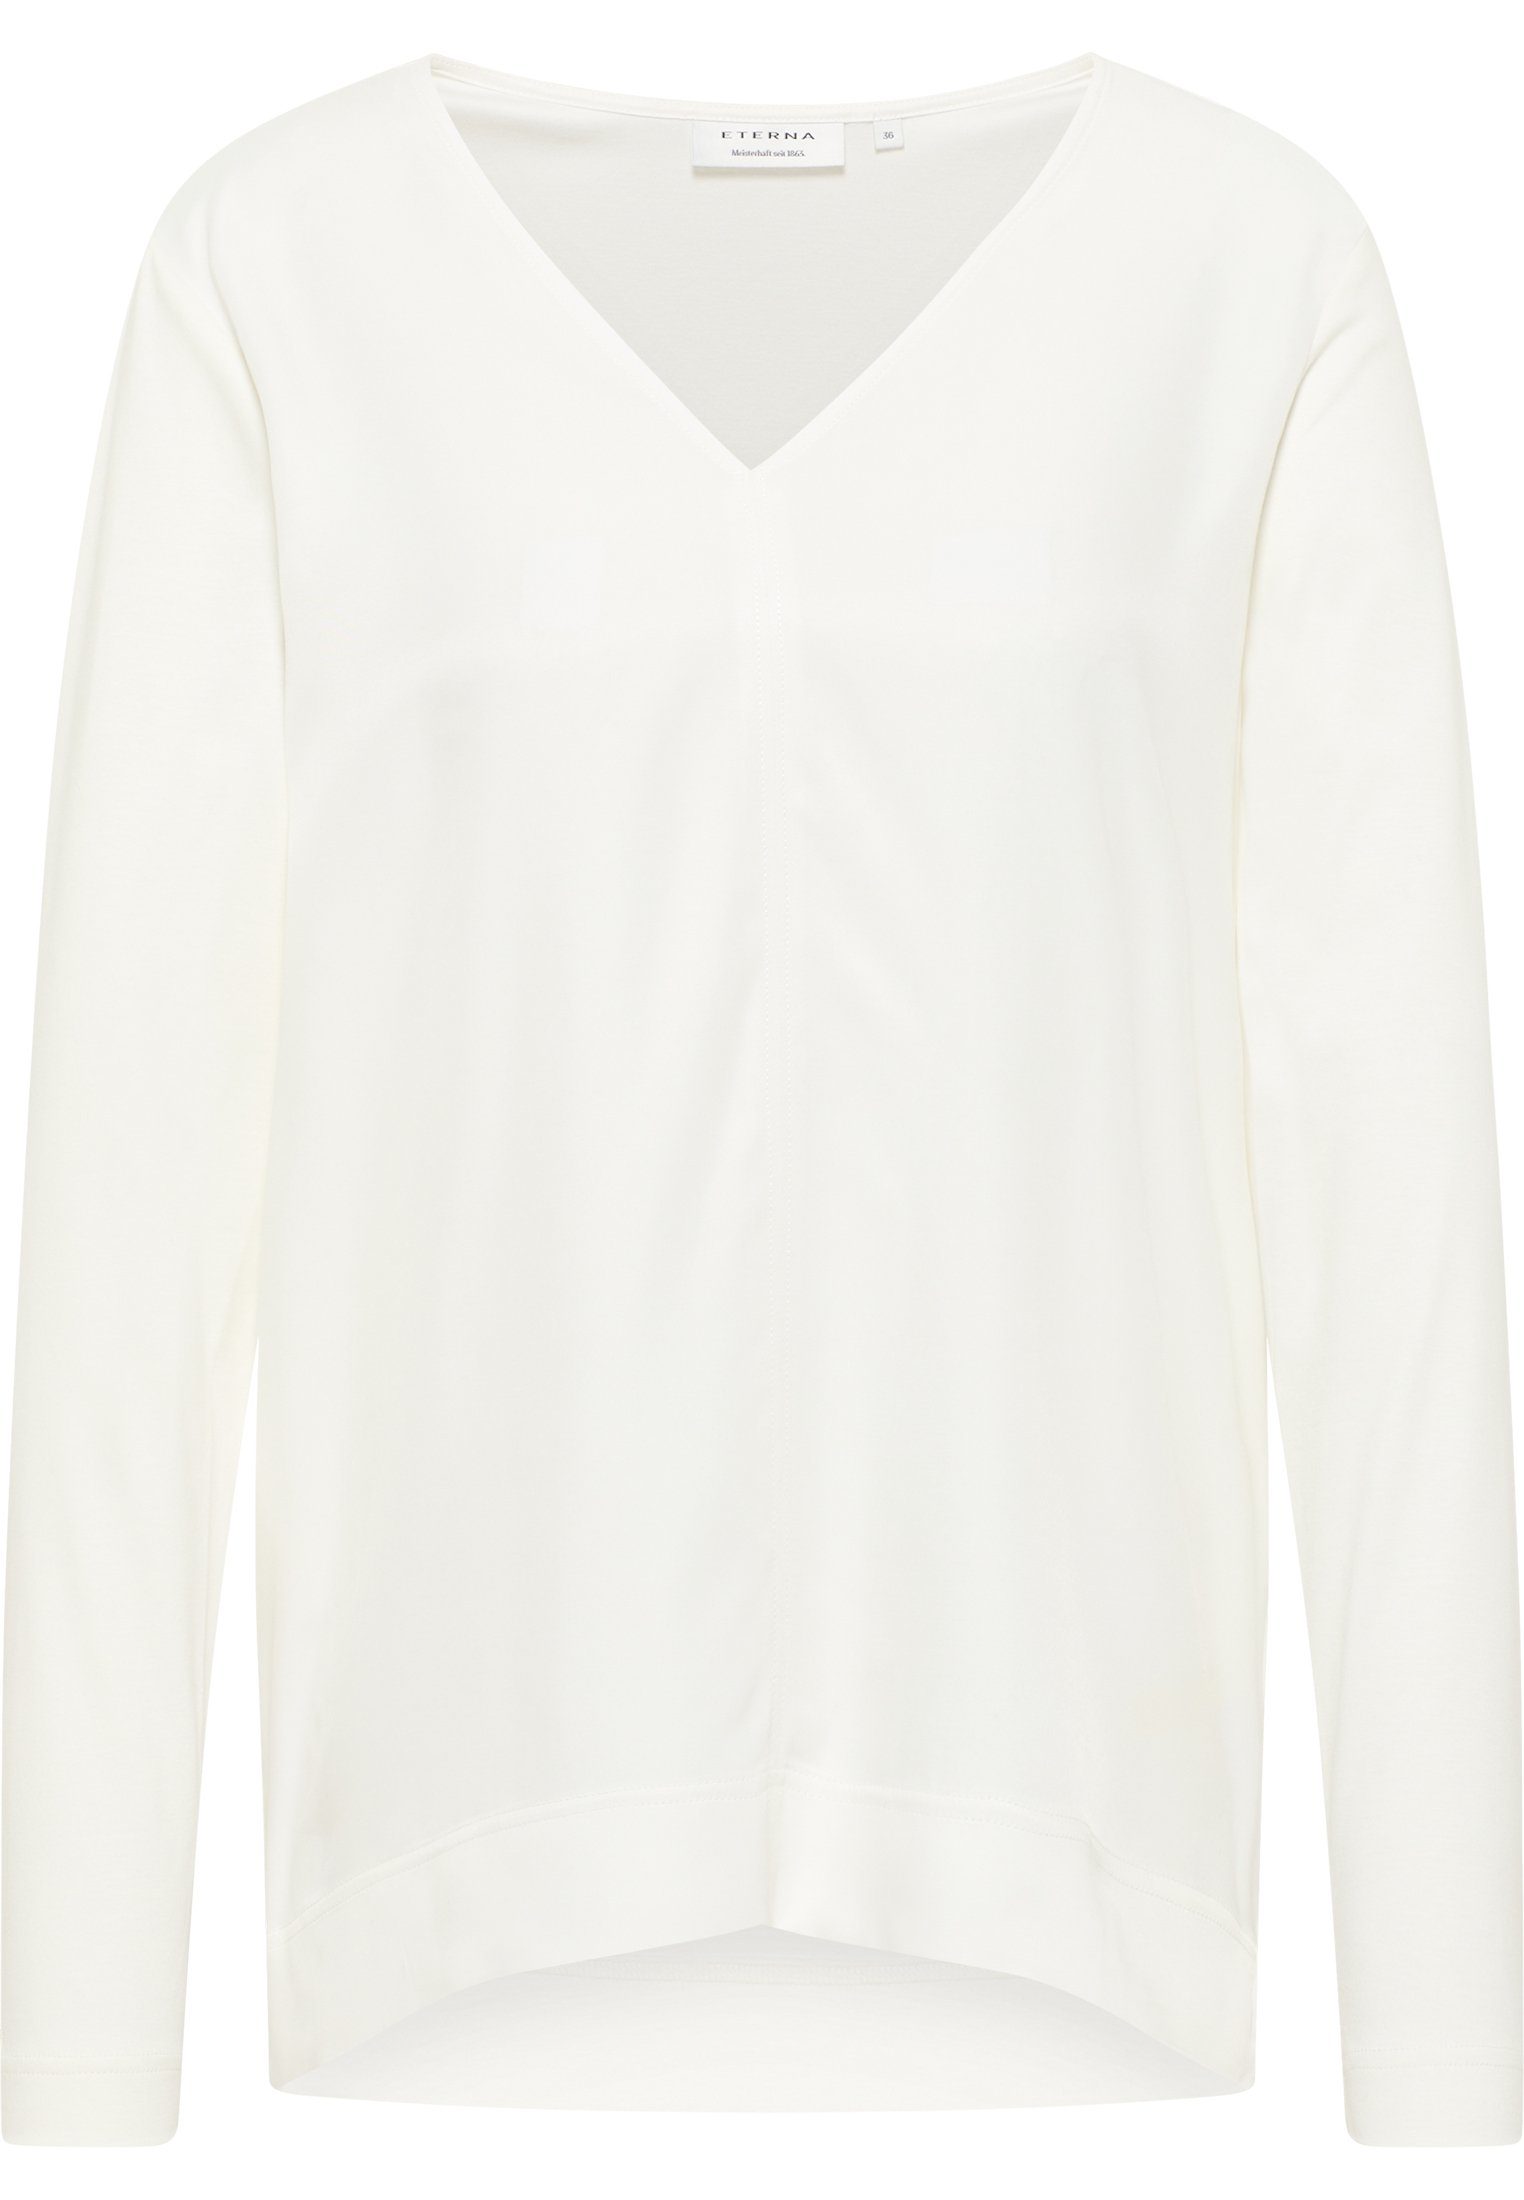 Eterna Shirtbluse off-white FIT LOOSE